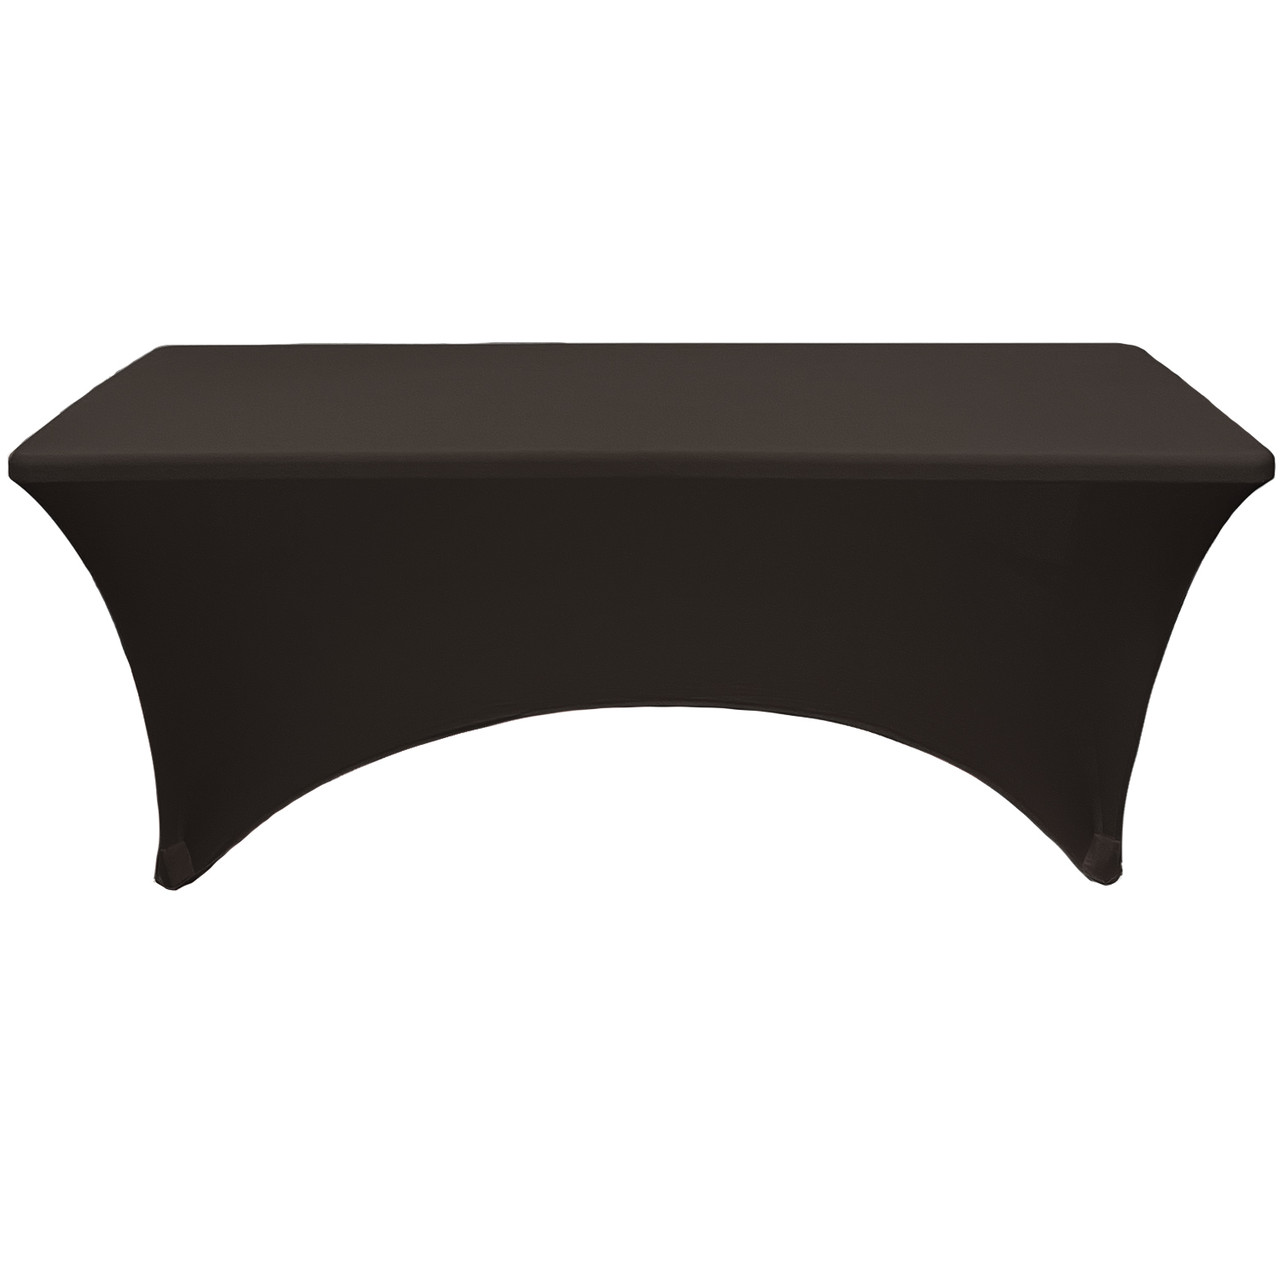 https://cdn11.bigcommerce.com/s-bch7e9/images/stencil/1280x1280/products/551/14905/spa-6ft-rectangular-tablecloth-black-front__83364.1665516022.jpg?c=2